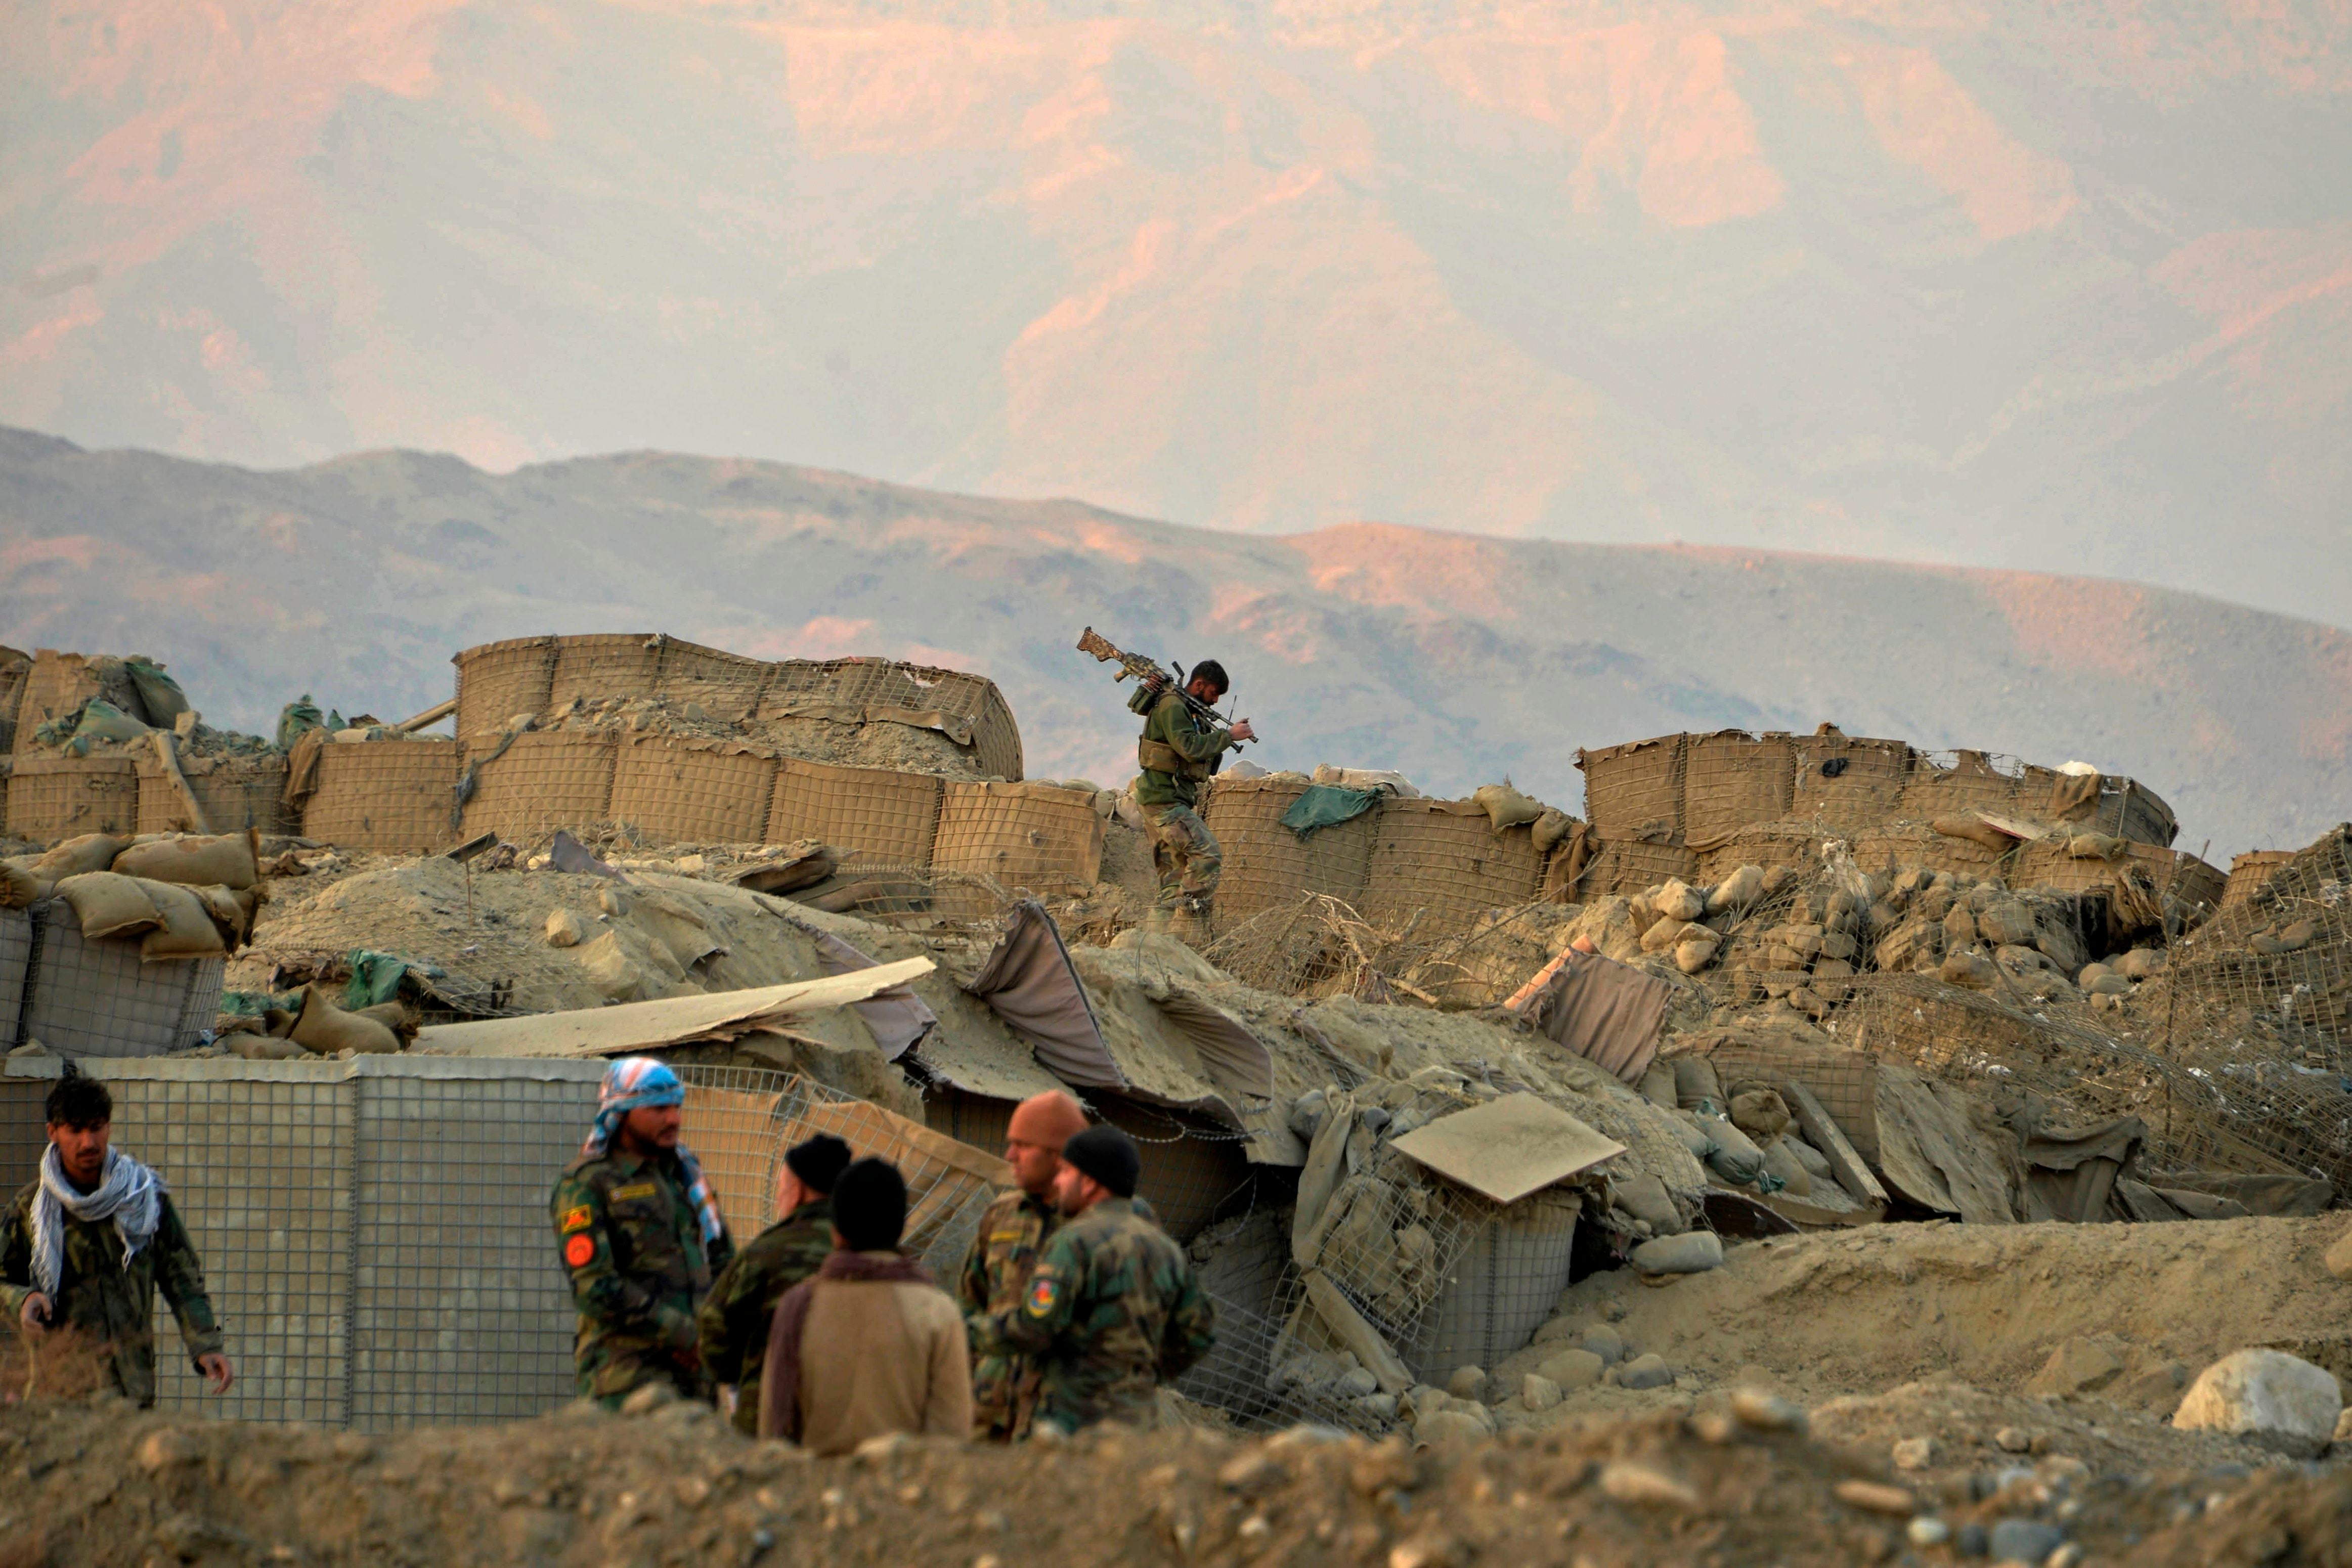 ‘2020 could have been the year of peace in Afghanistan’